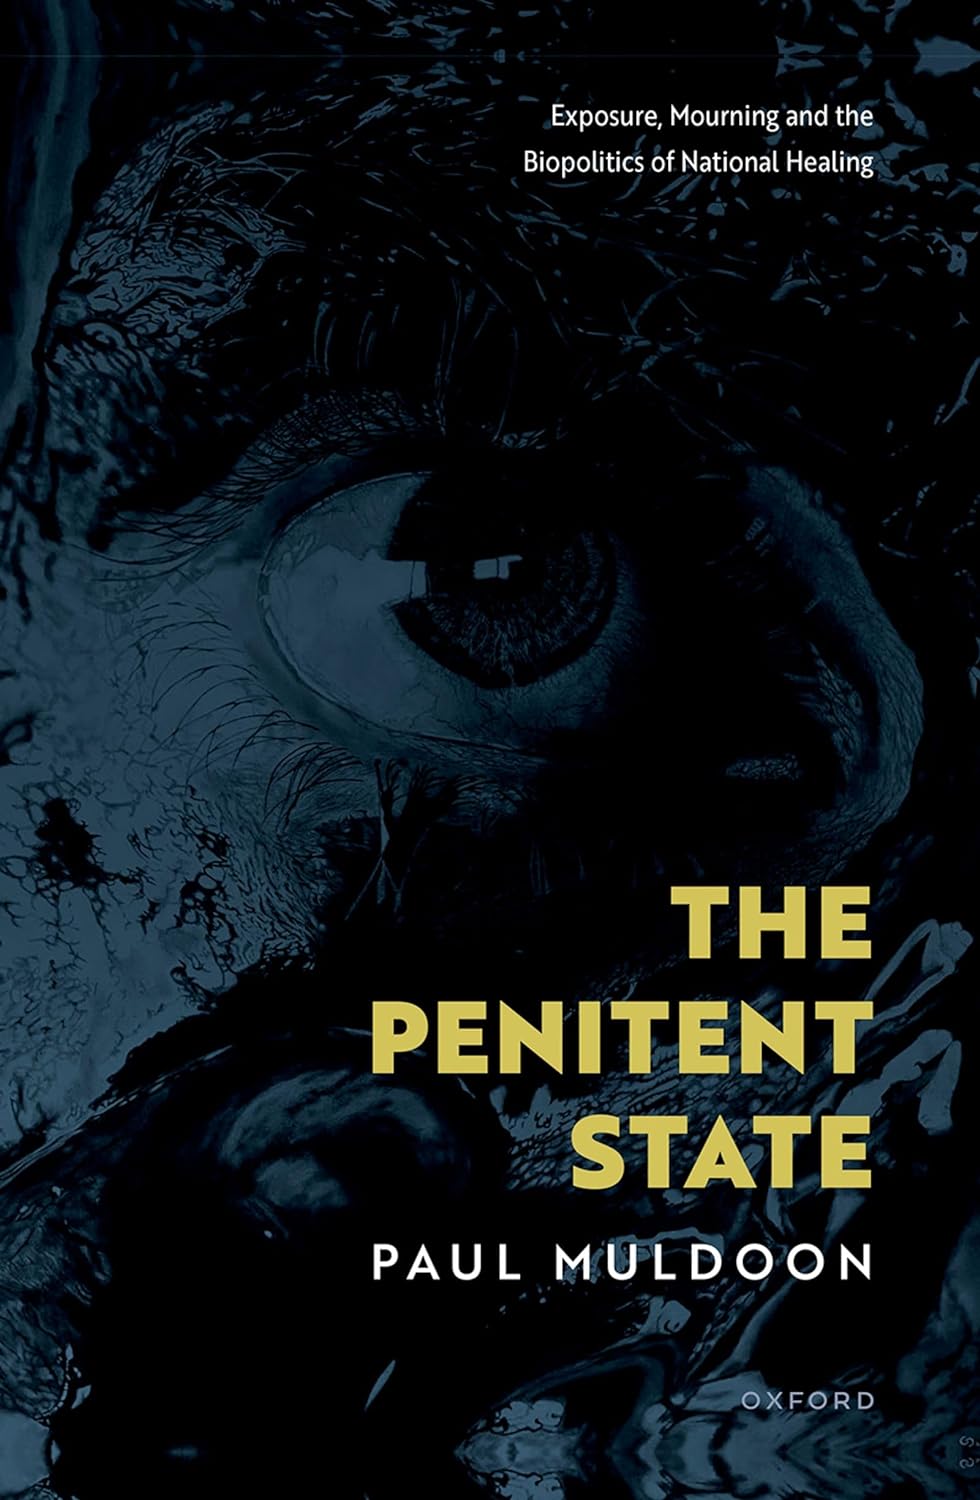 The Penitent State: Exposure, mourning, and the biopolitics of national healing